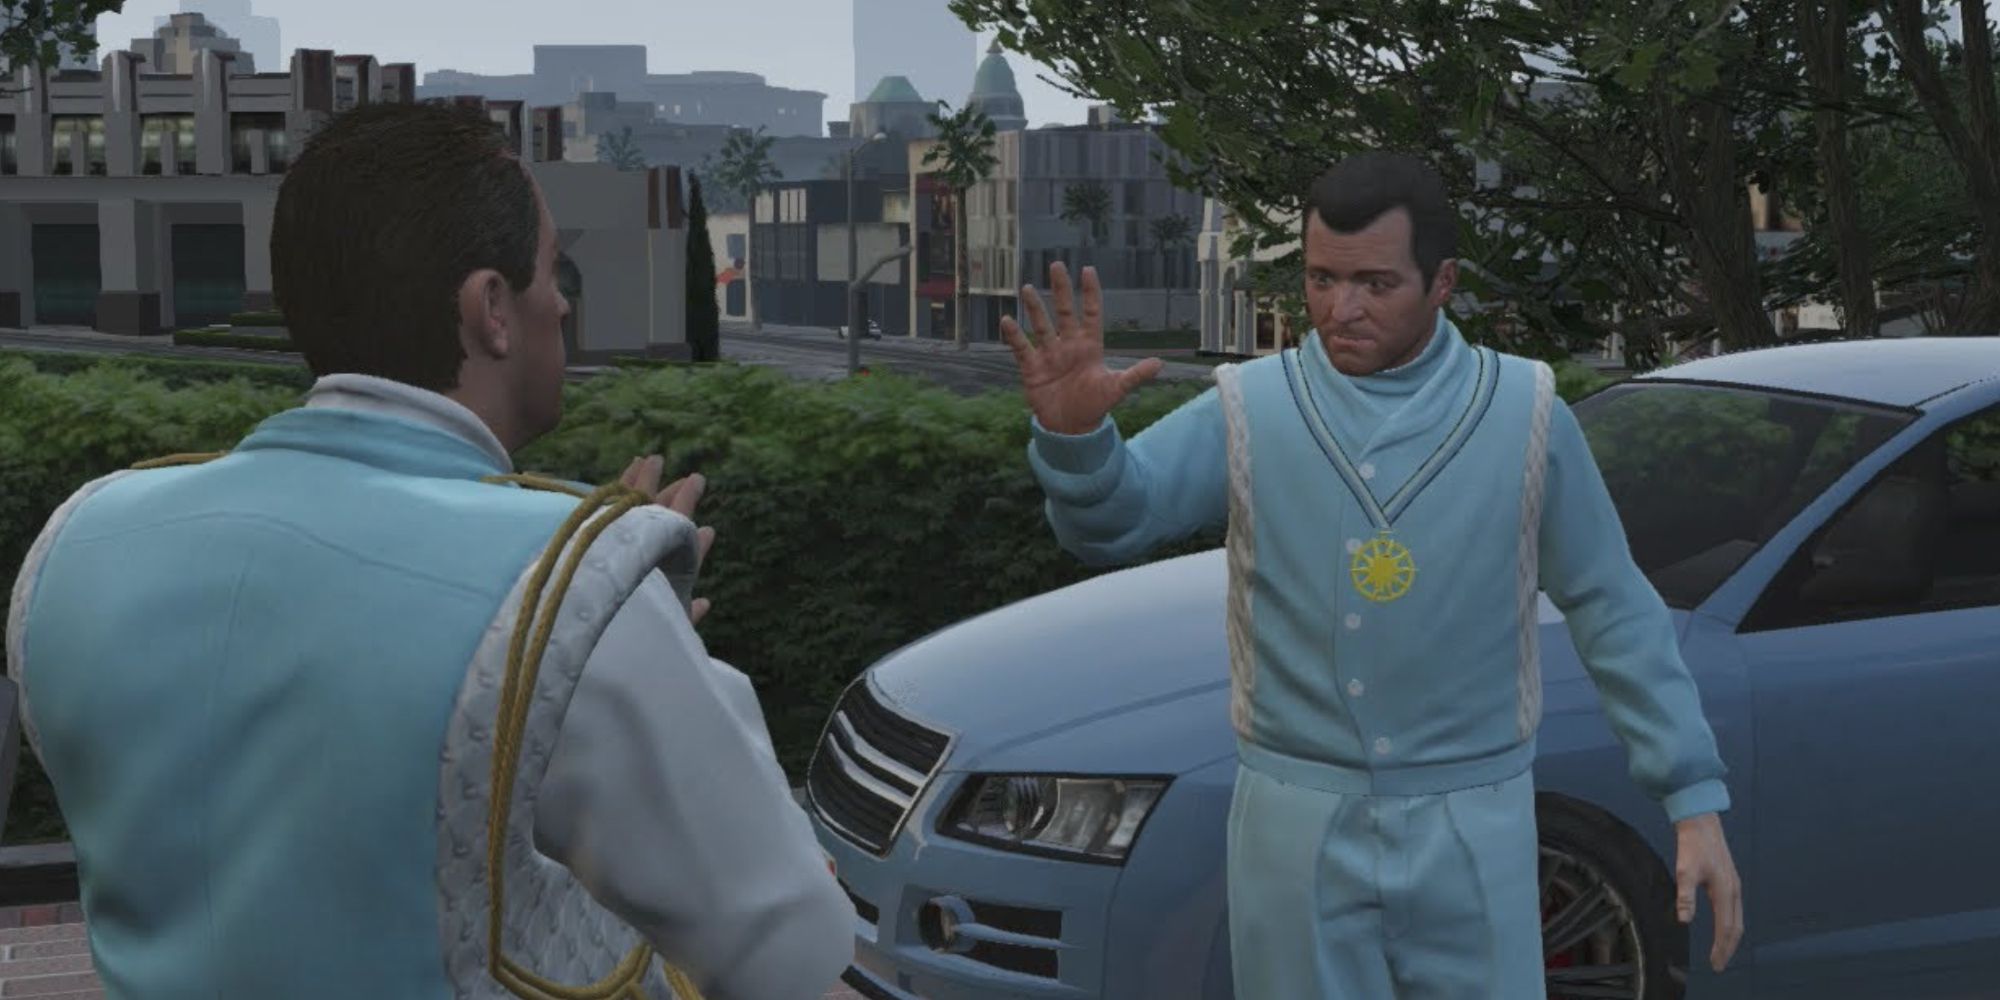 Michael interacting with someone from the Epsilon Program cult wearing cult uniform in GTA V